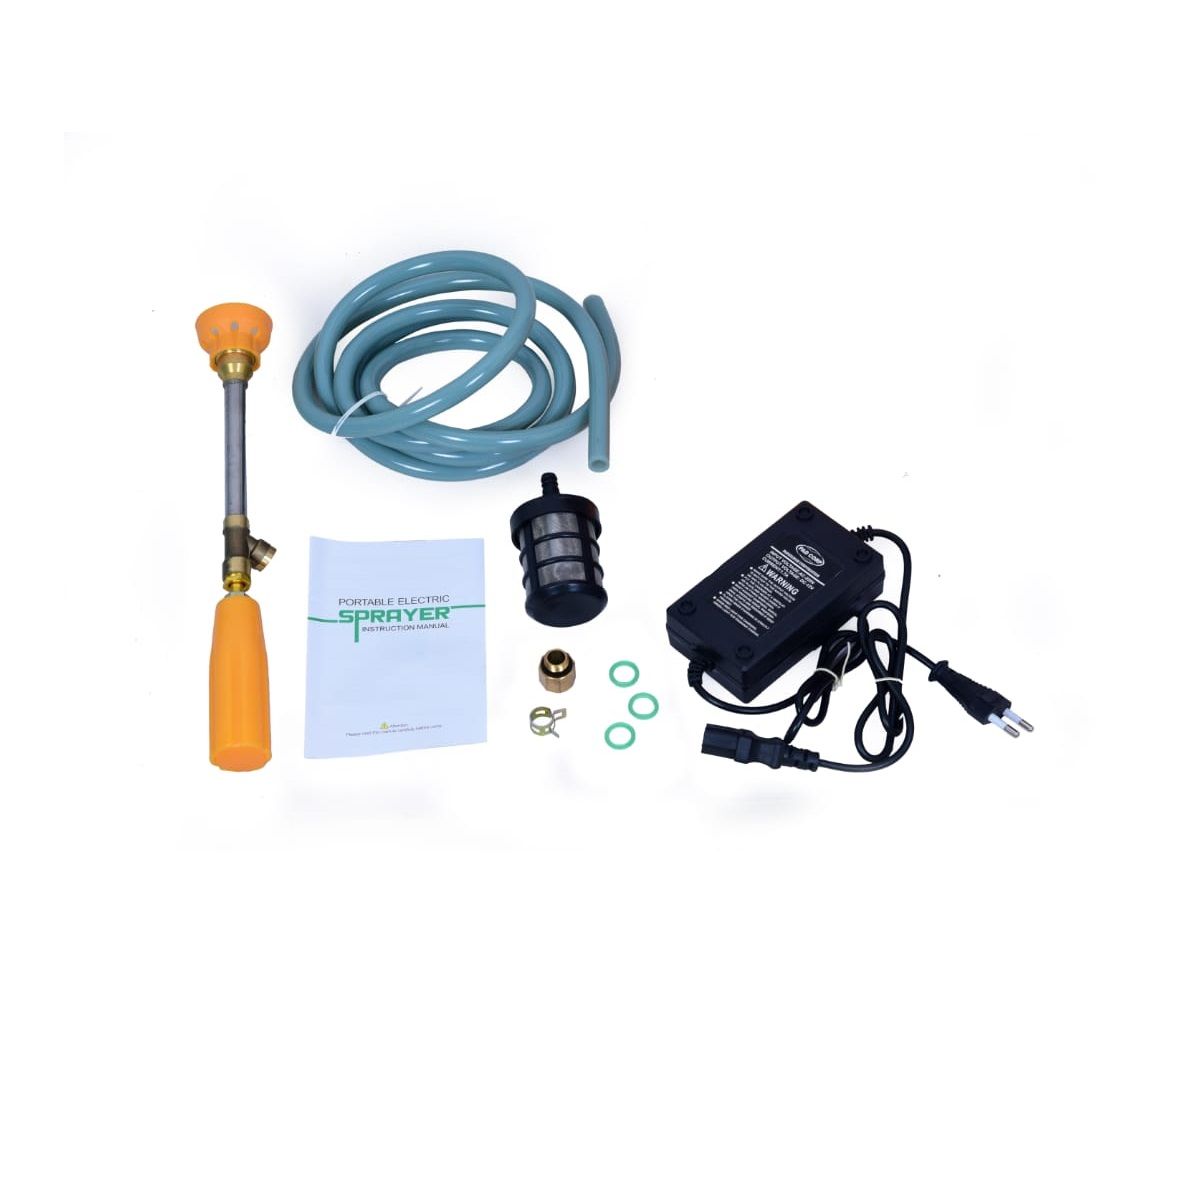 Pad Corp Double Bull Portable Battery Sprayer and Car Washer with 10m High Pressure Hose Pipe